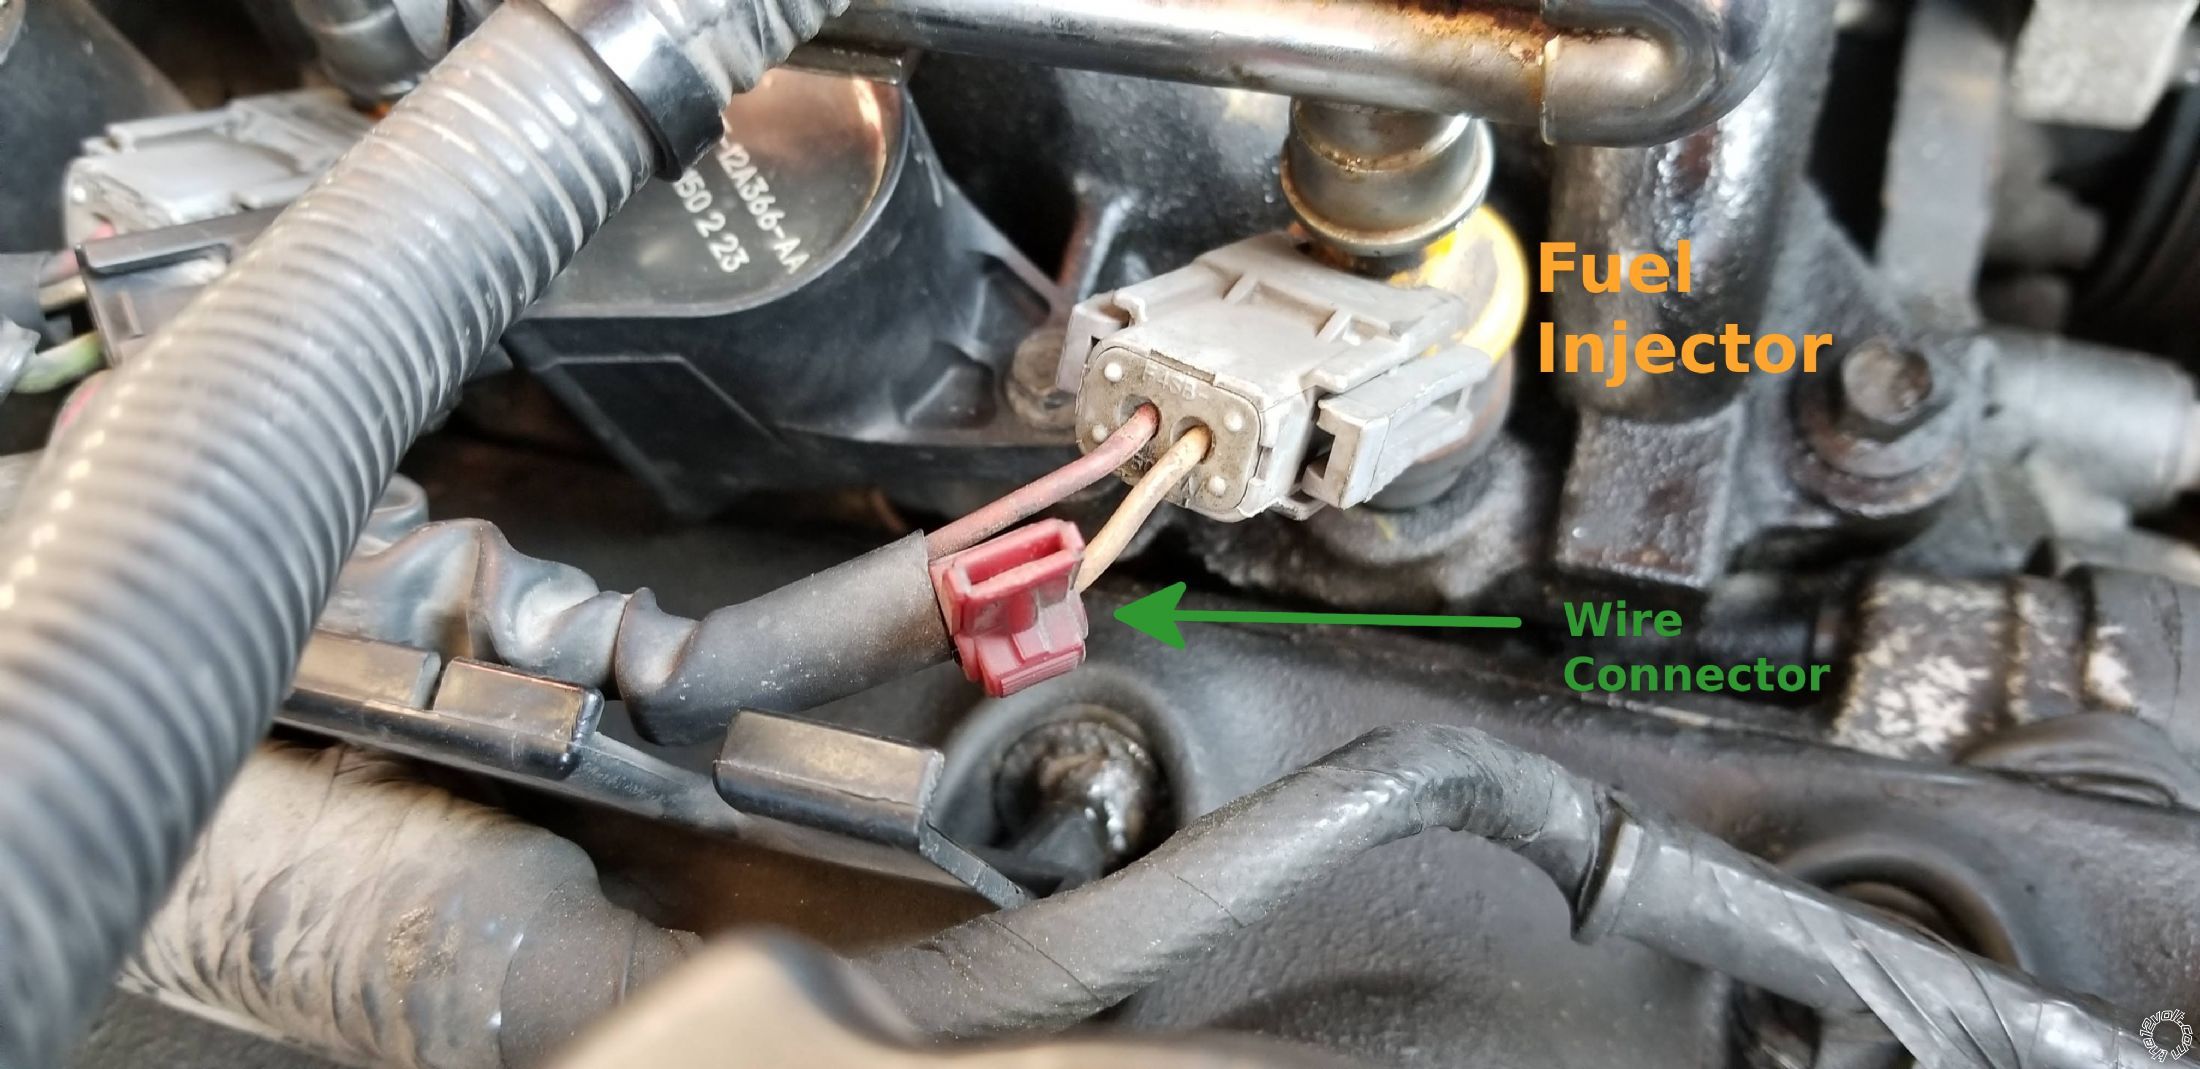 1999 Ford F-150, Python 1500HF Remote Start Won’t Work After Engine Repair -- posted image.